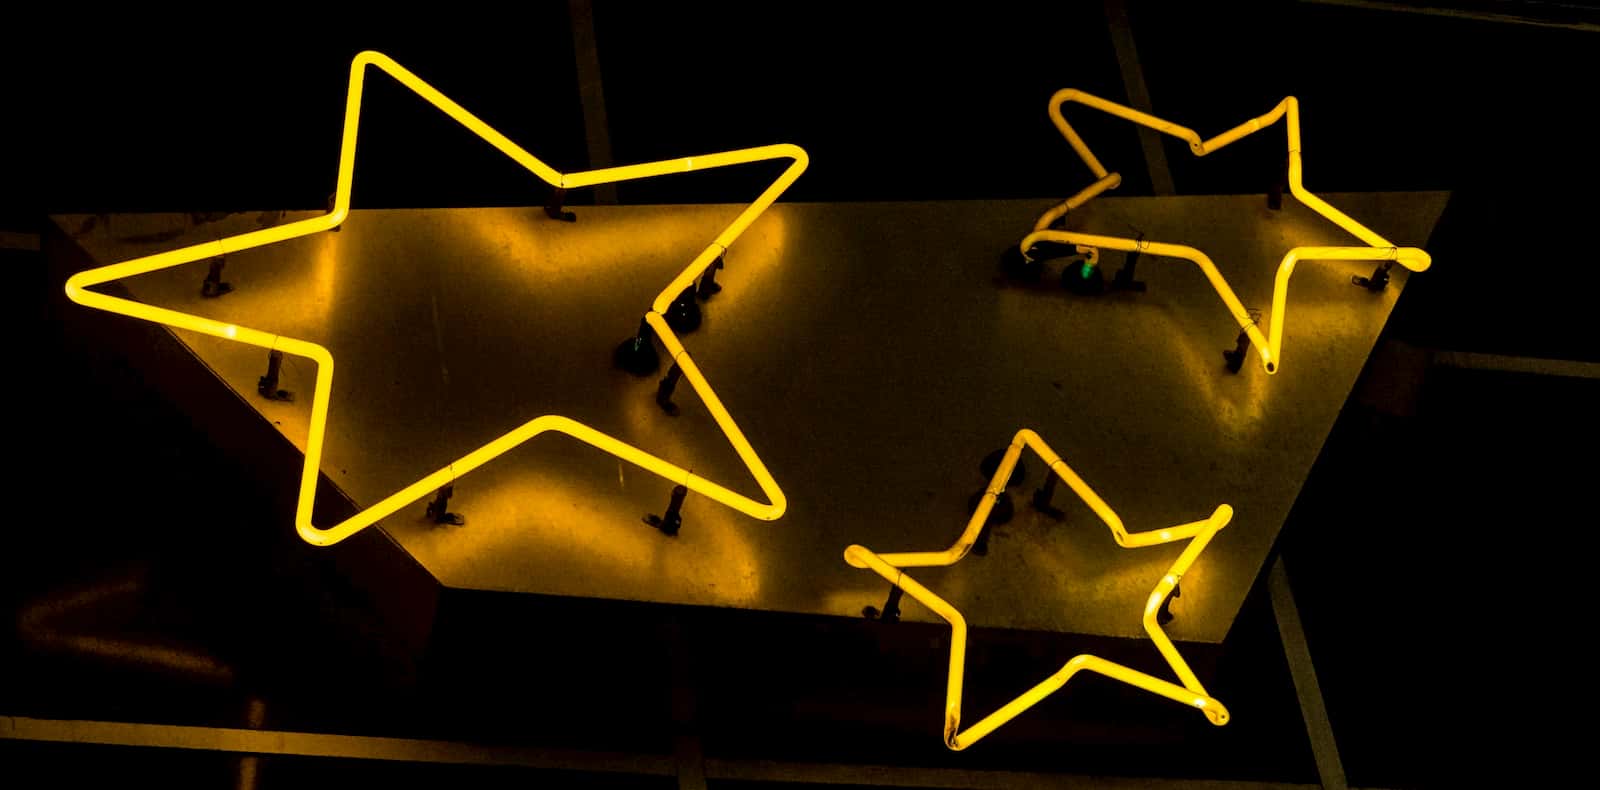 Three Gold Stars - Online Review Tools